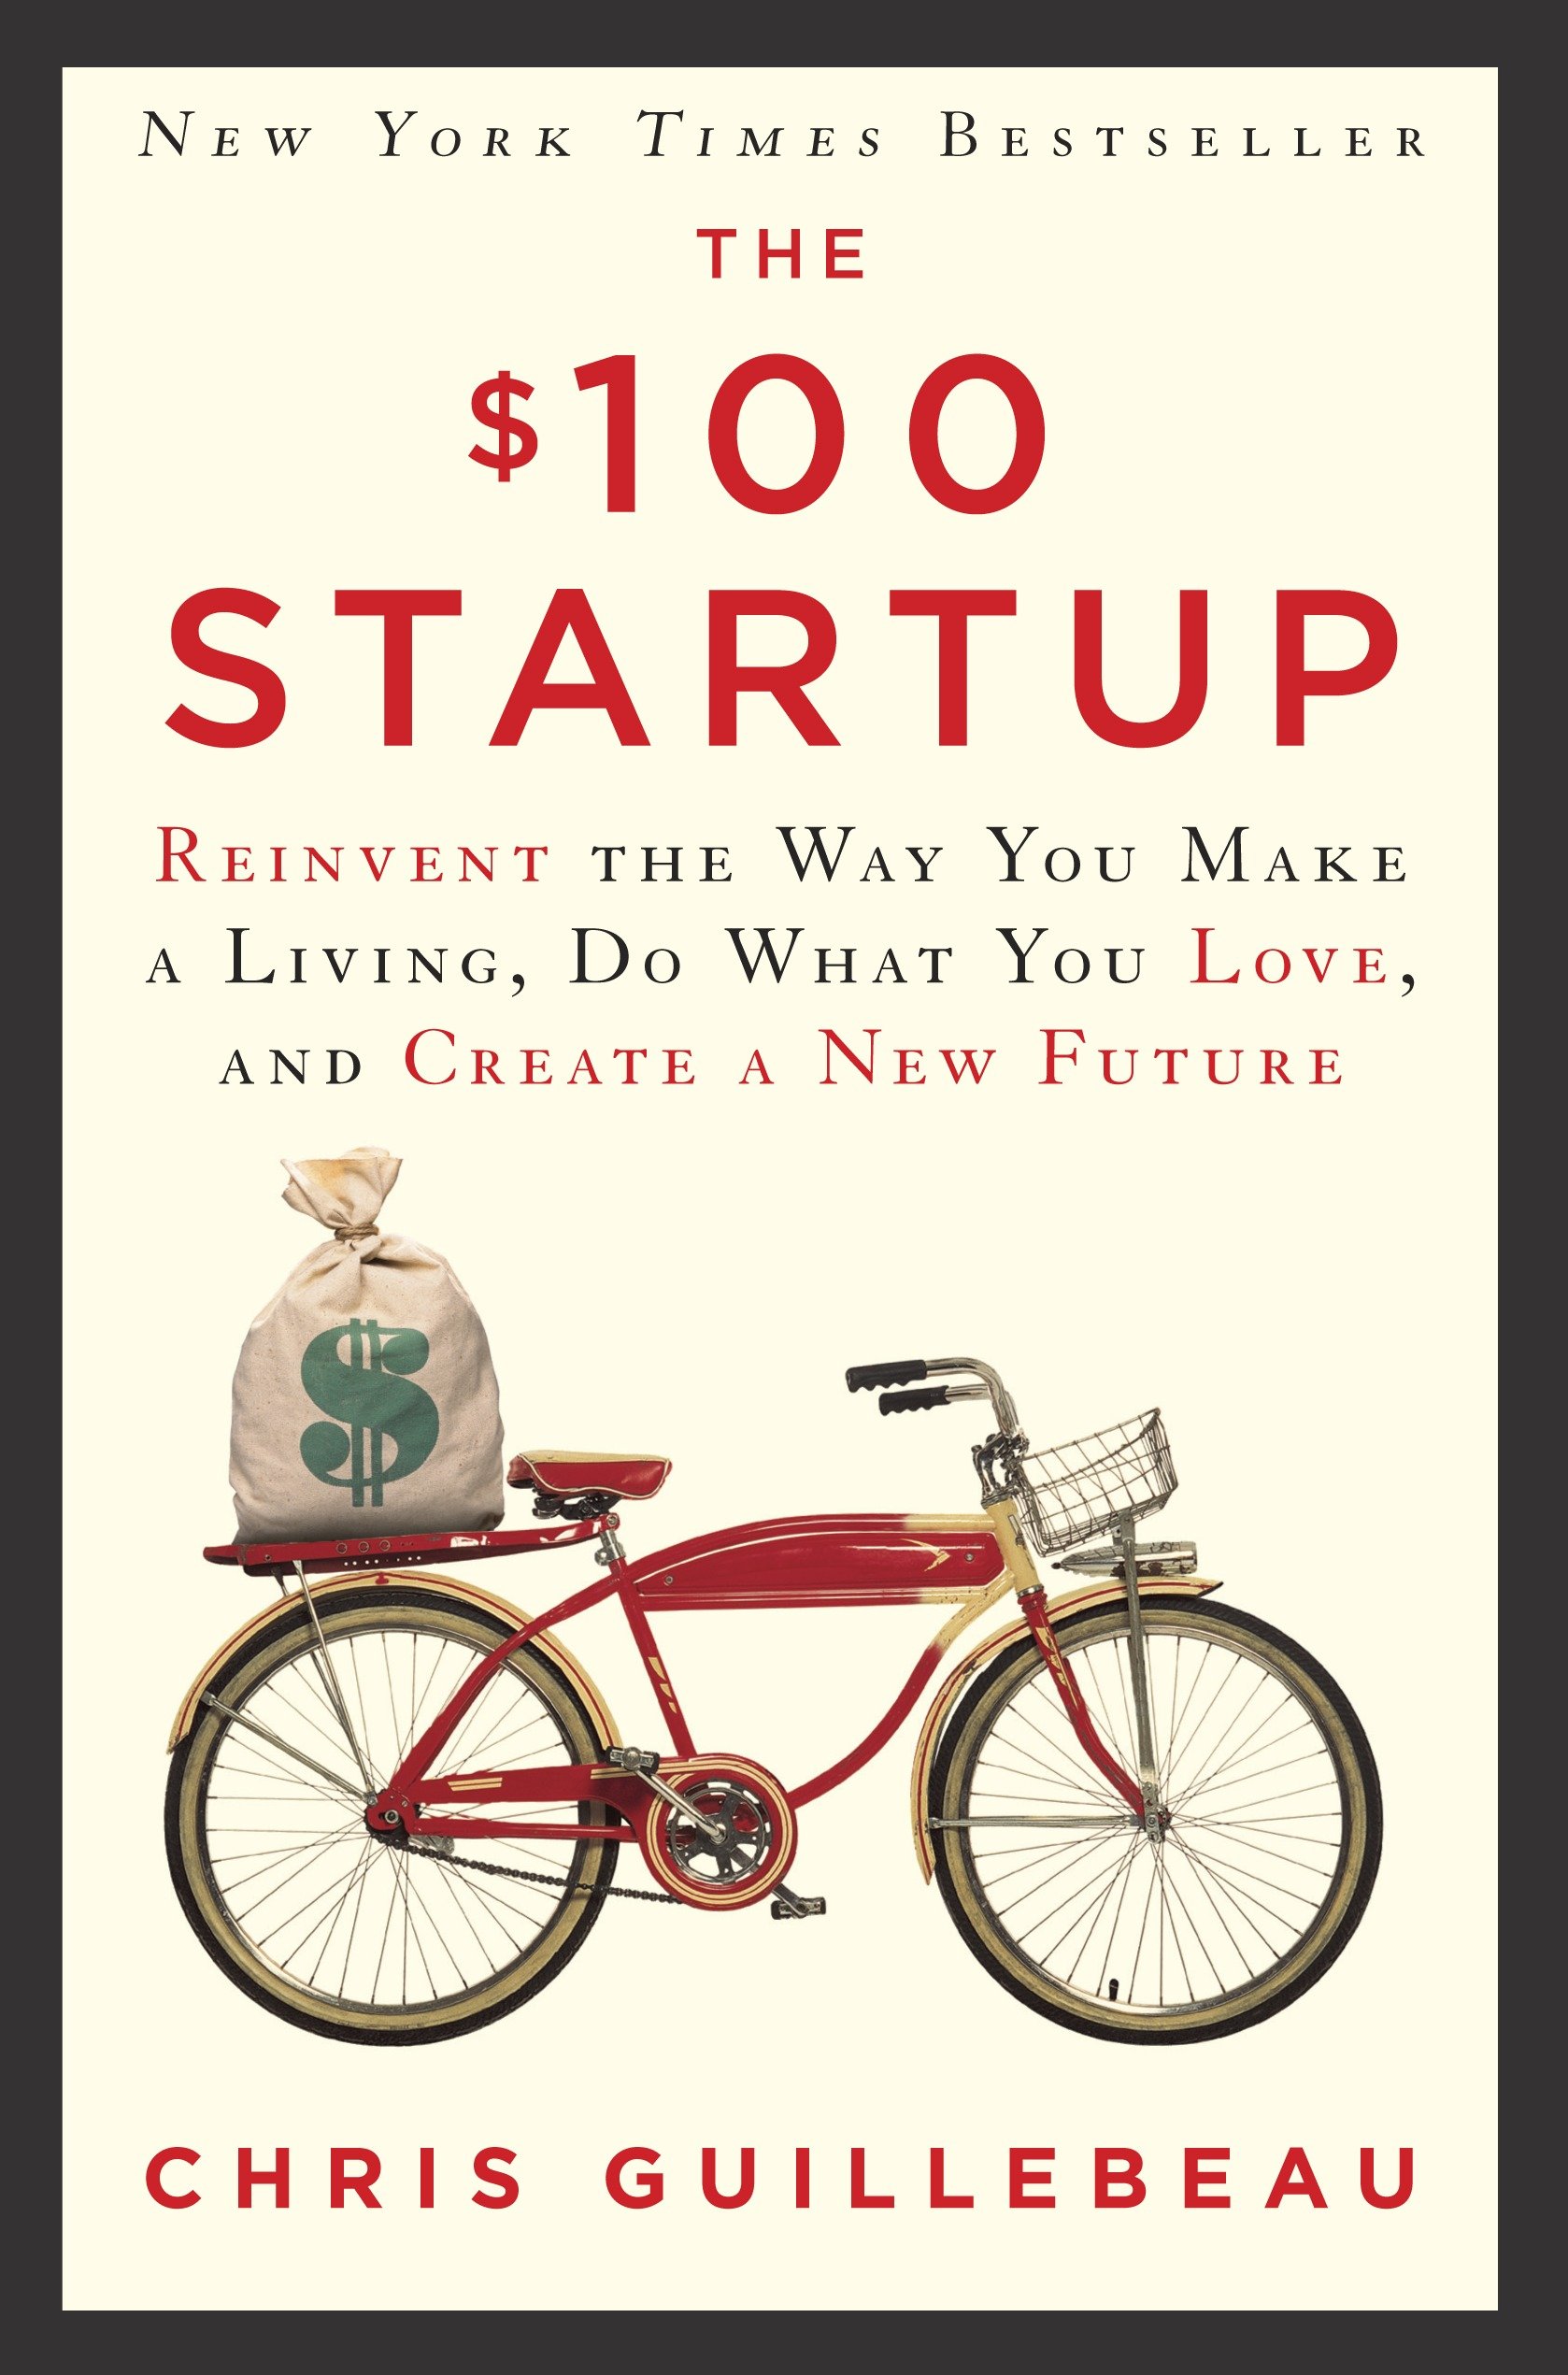 The $100 startup reinvent the way you make a living, do what you love, and create a new future cover image